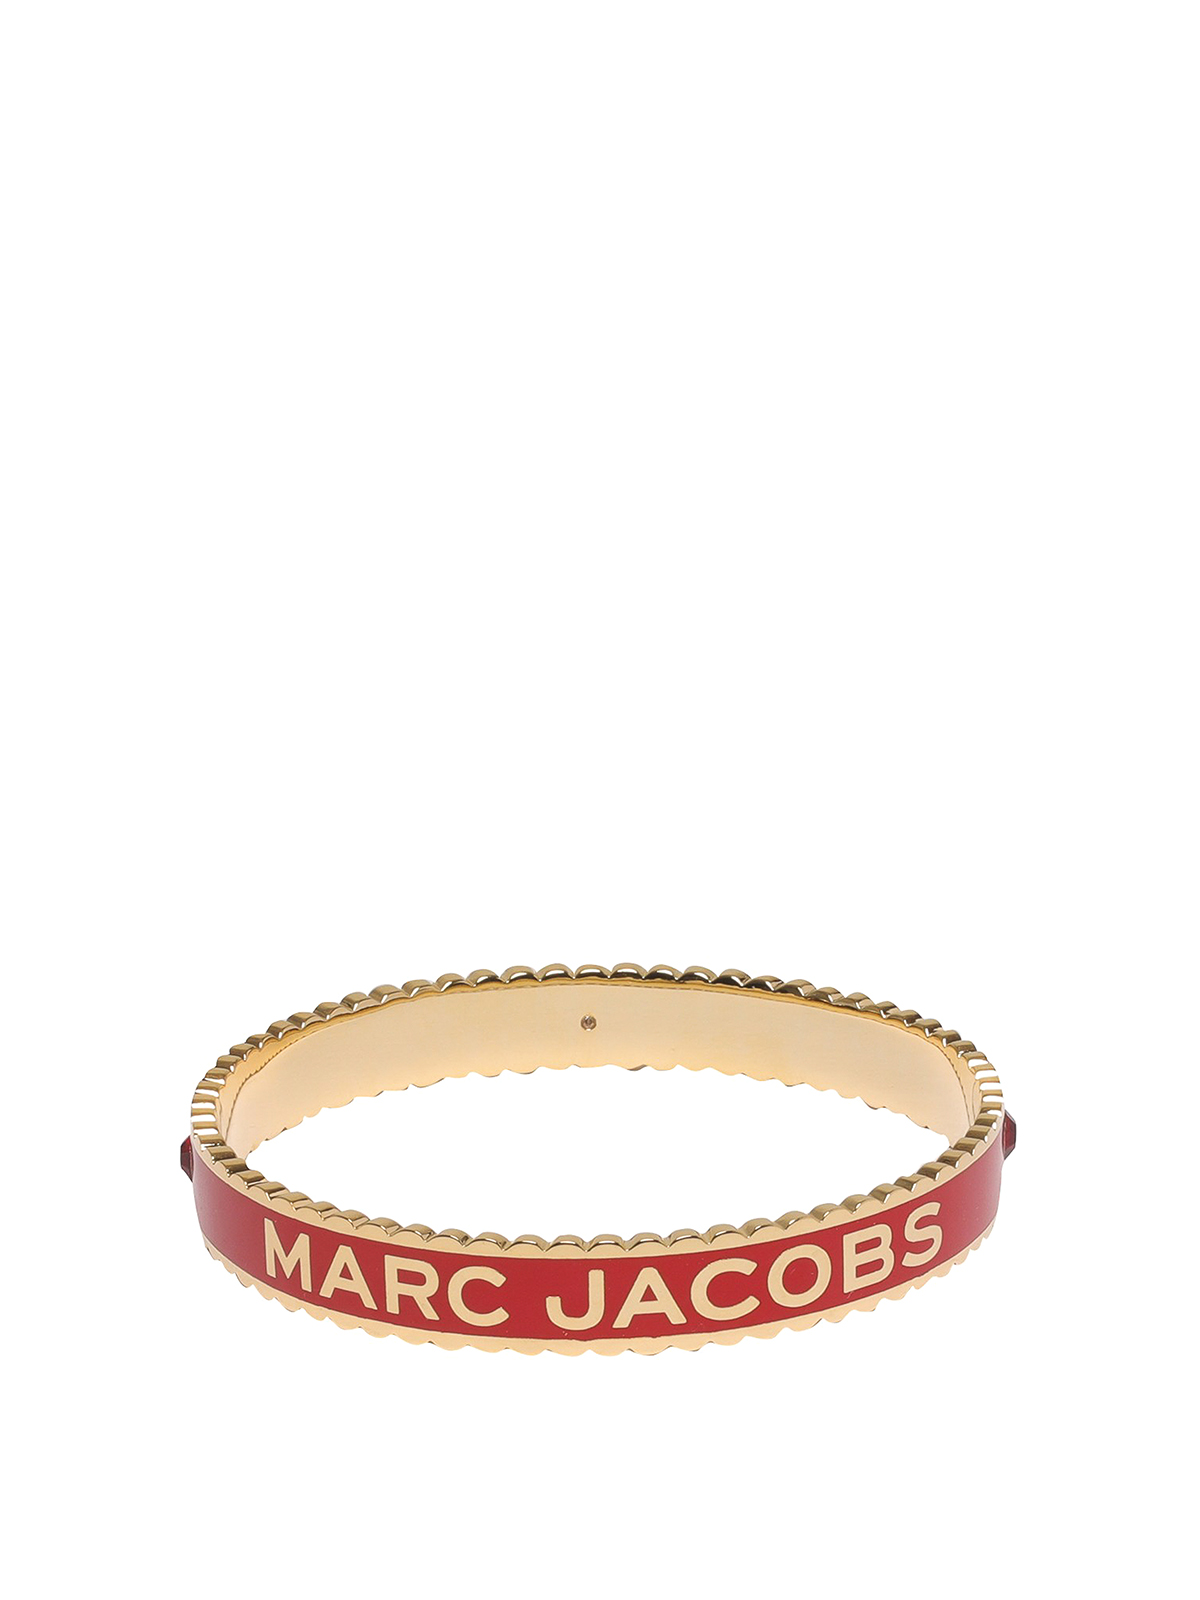 Marc by Marc Jacobs miss Marc jungle charm Bracelet Red - $90 - From Beatriz